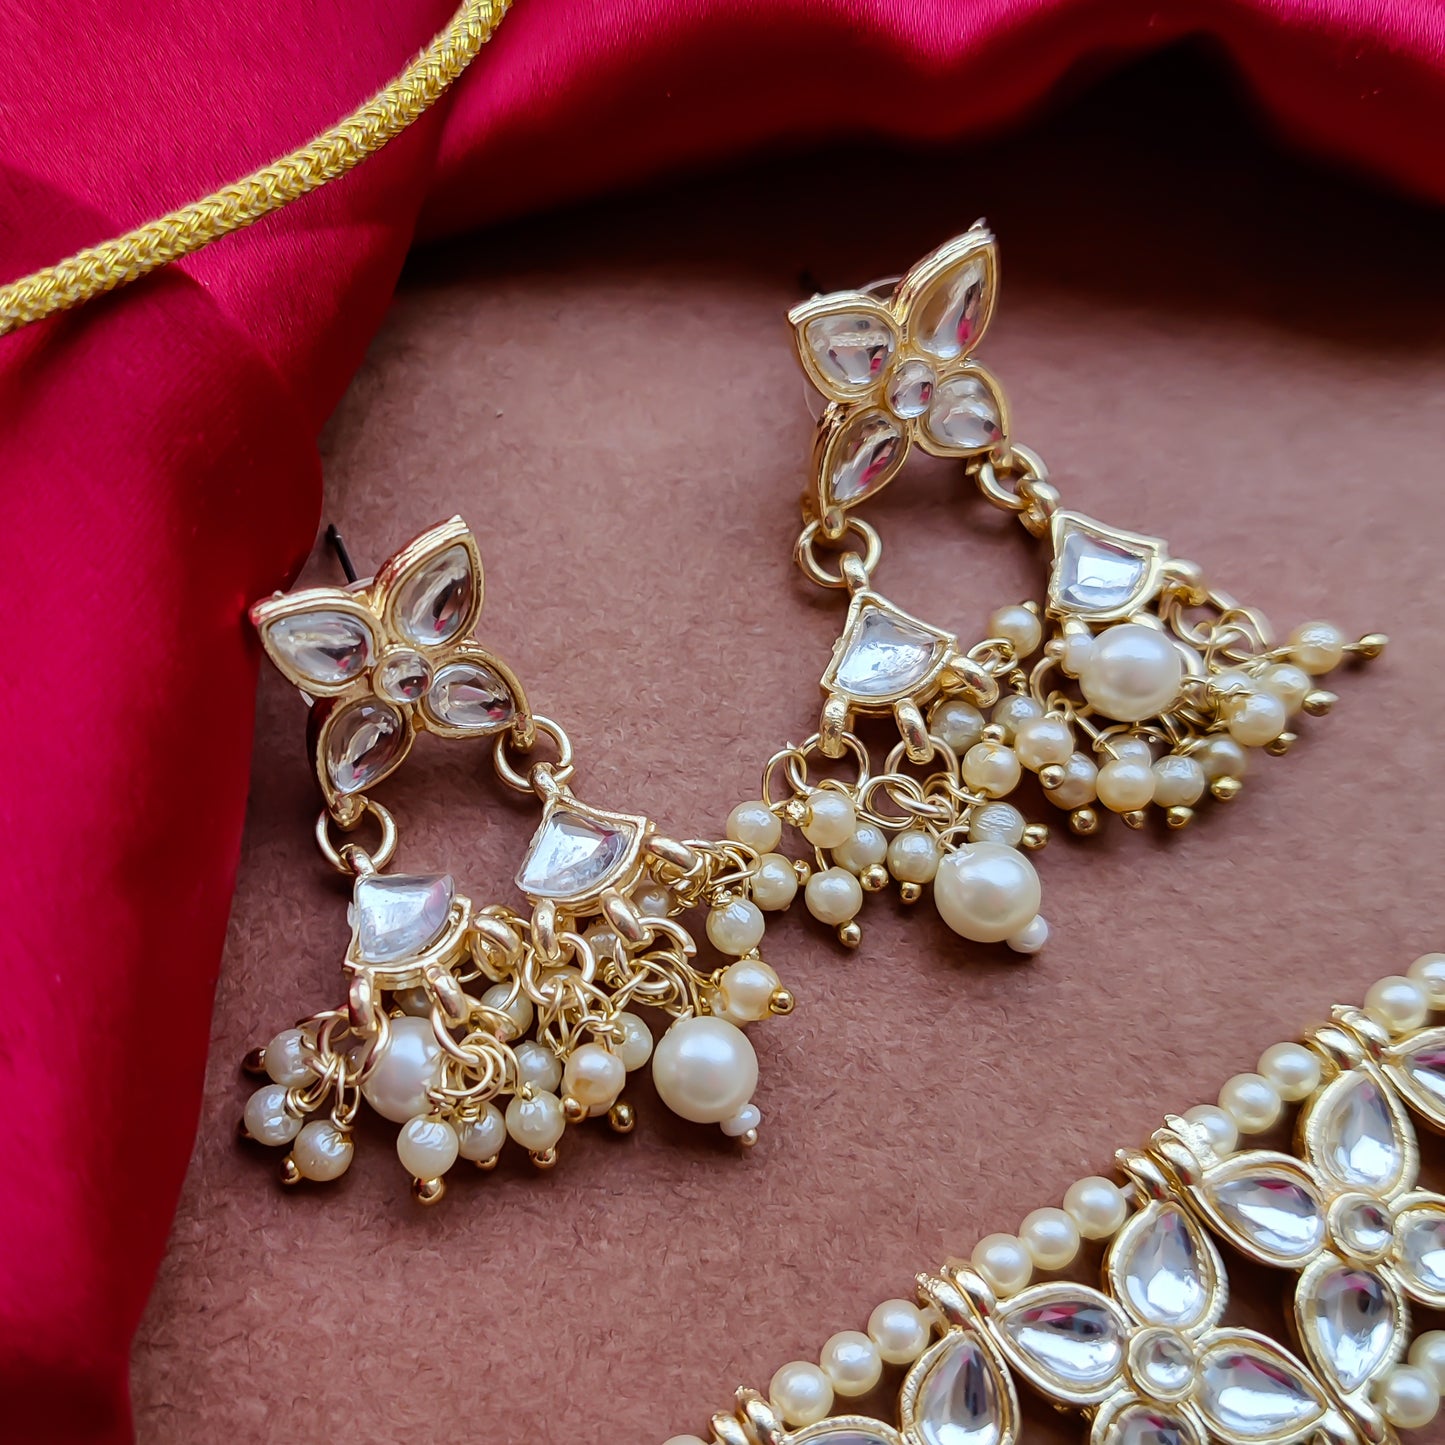 Mridul Golden Necklace Set with Earrings & Tika